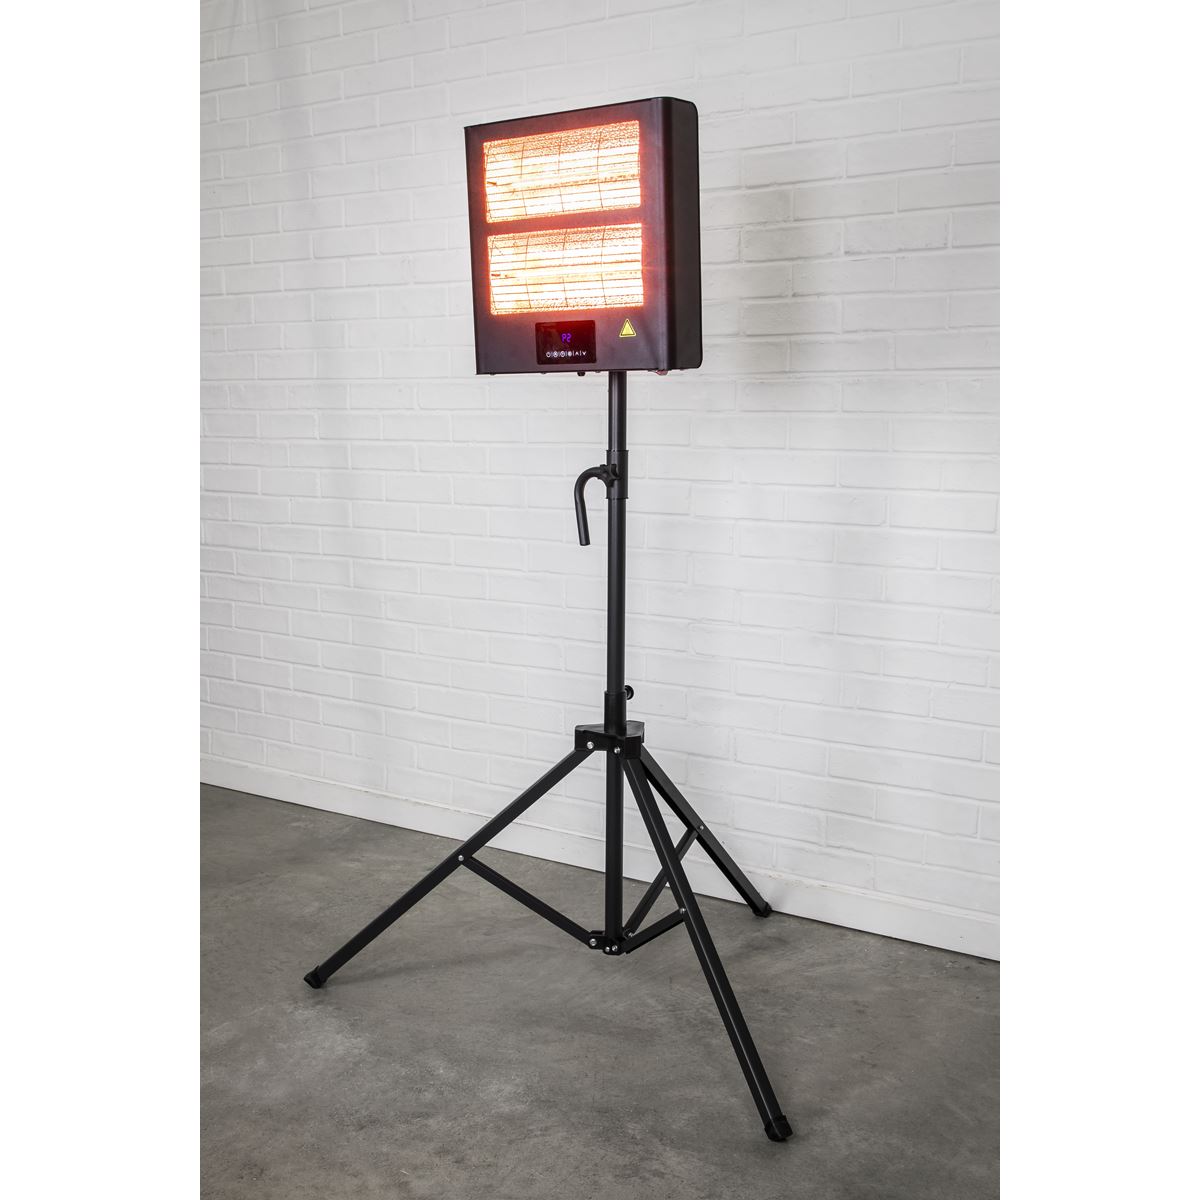 Sealey Infrared Quartz Heater with Tripod Stand 230V 1.4/2.8kW